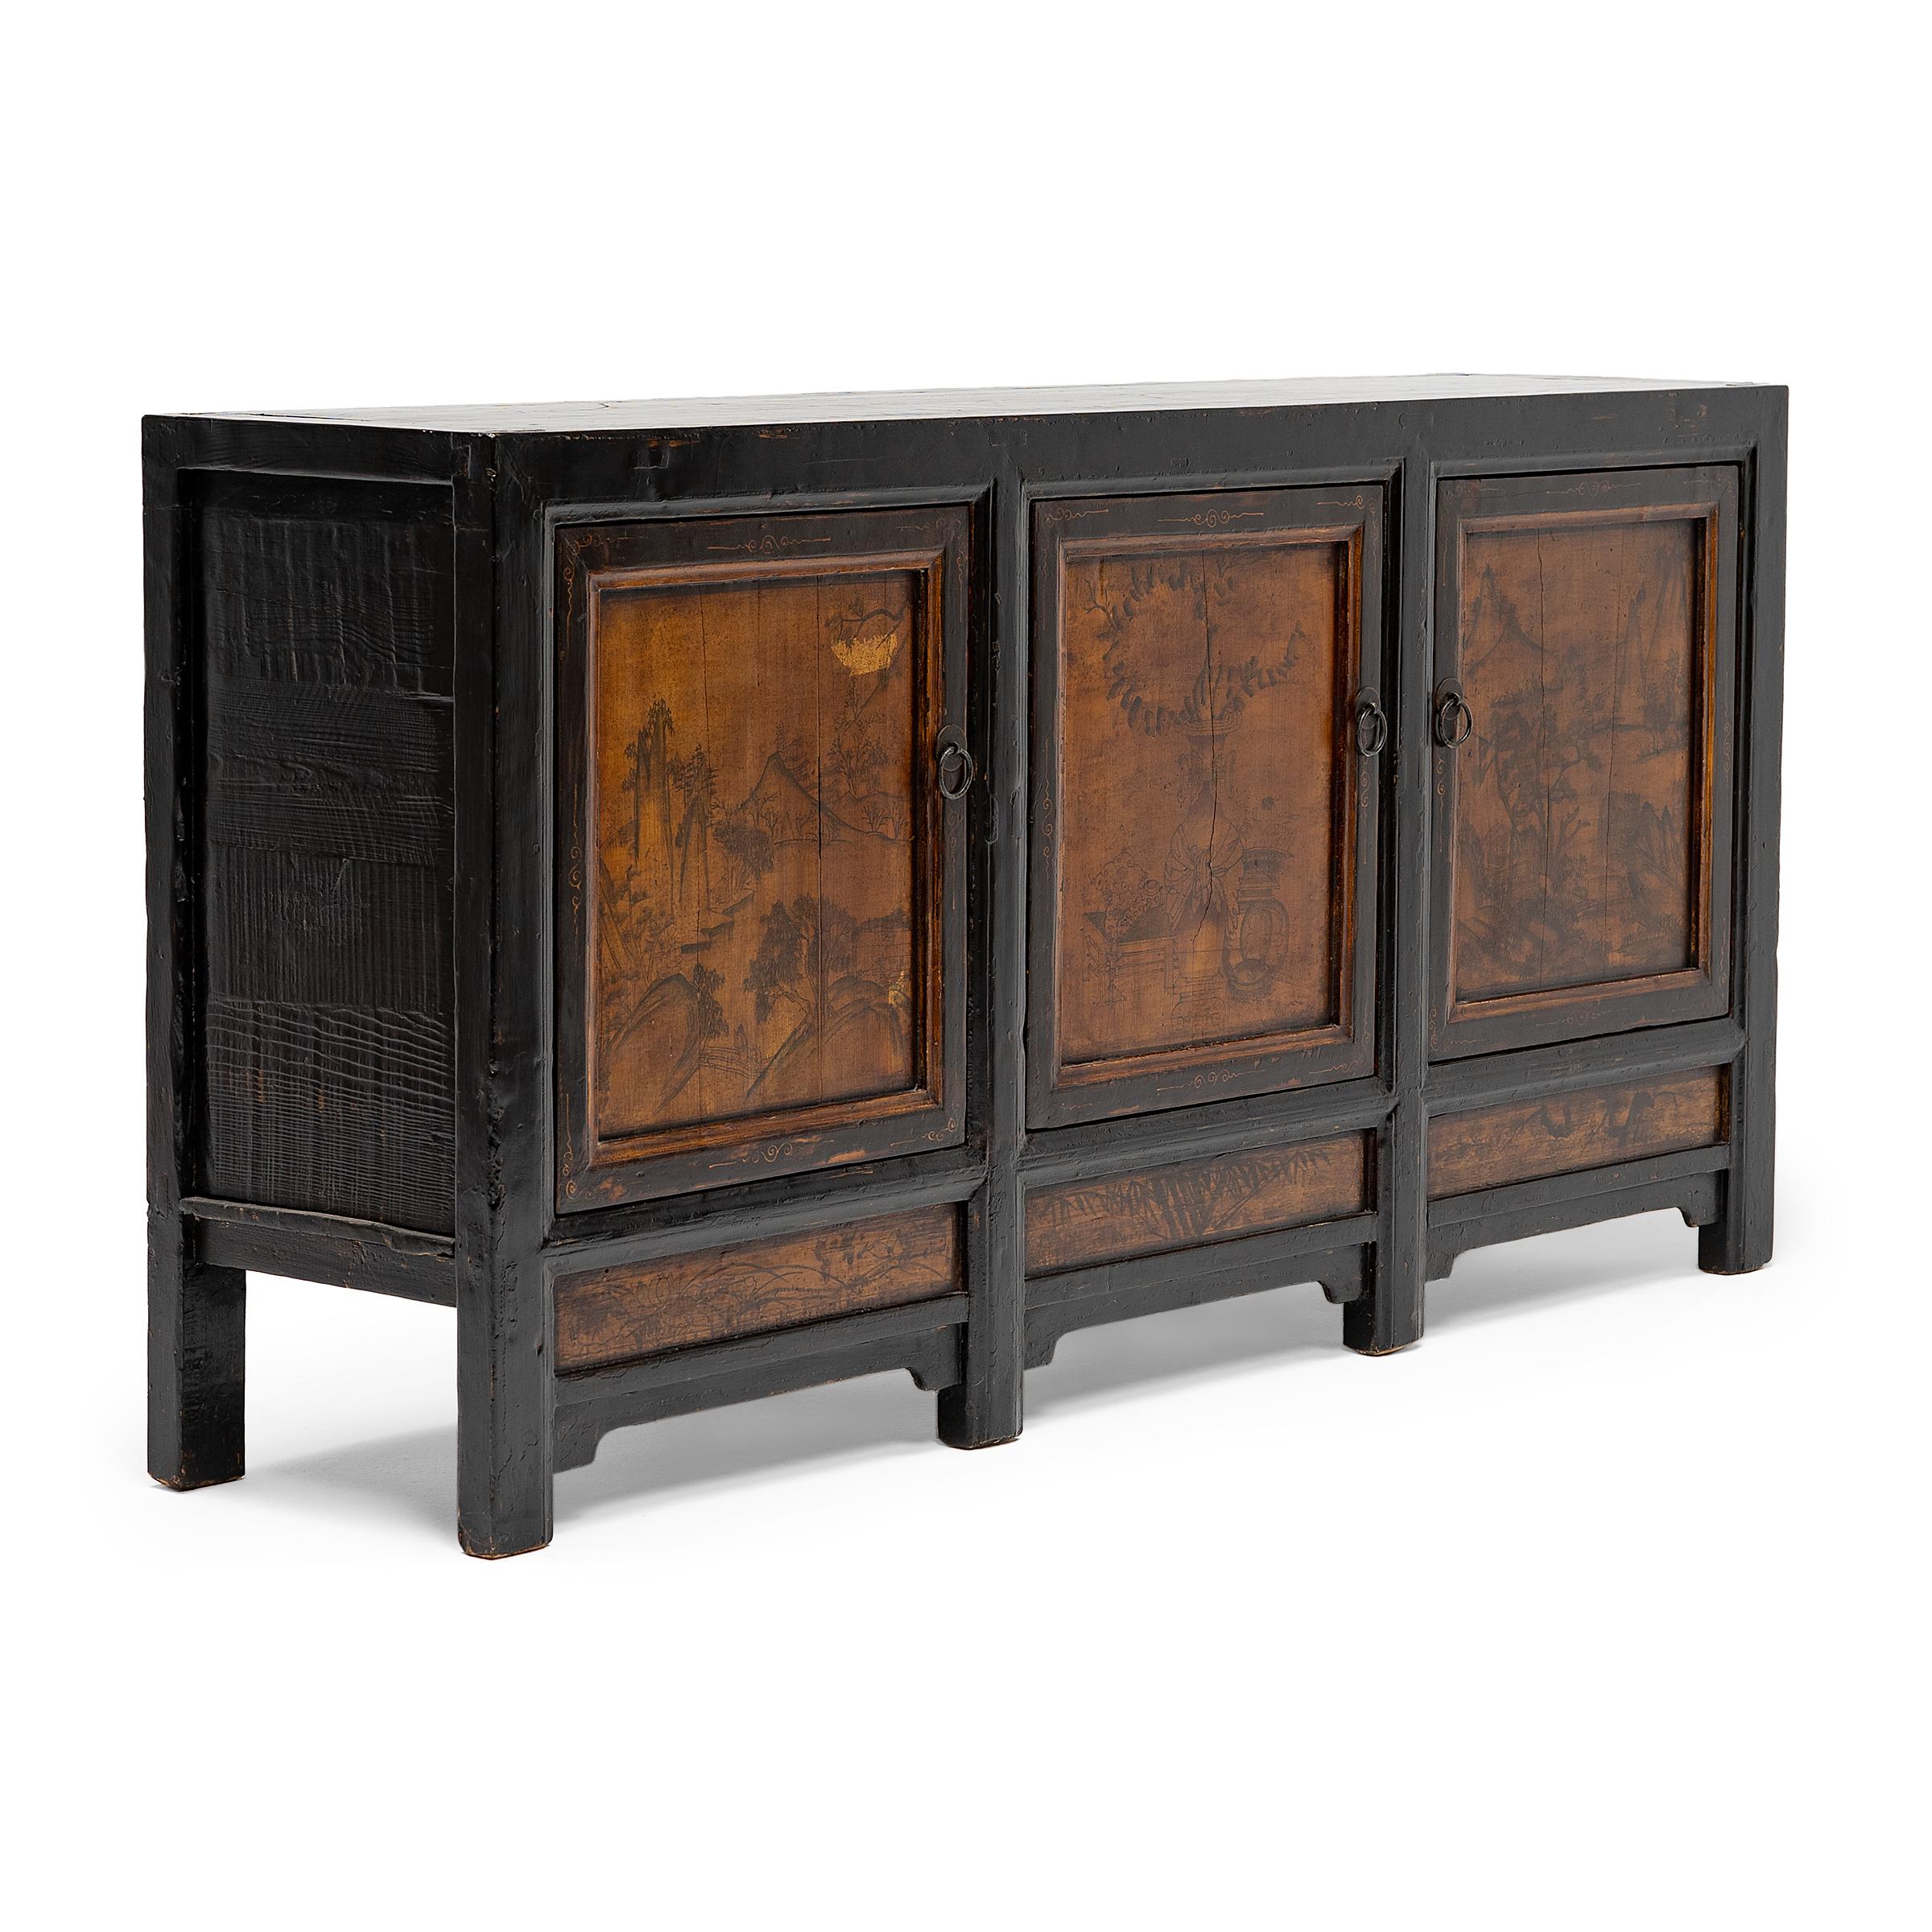 This provincial coffer from northern China has a simple, clean-lined form embellished with black lacquer and hand-painted inset panels. The cabinet was crafted in the mid-19th century with mortise-and-tenon joinery methods, without the use of nails